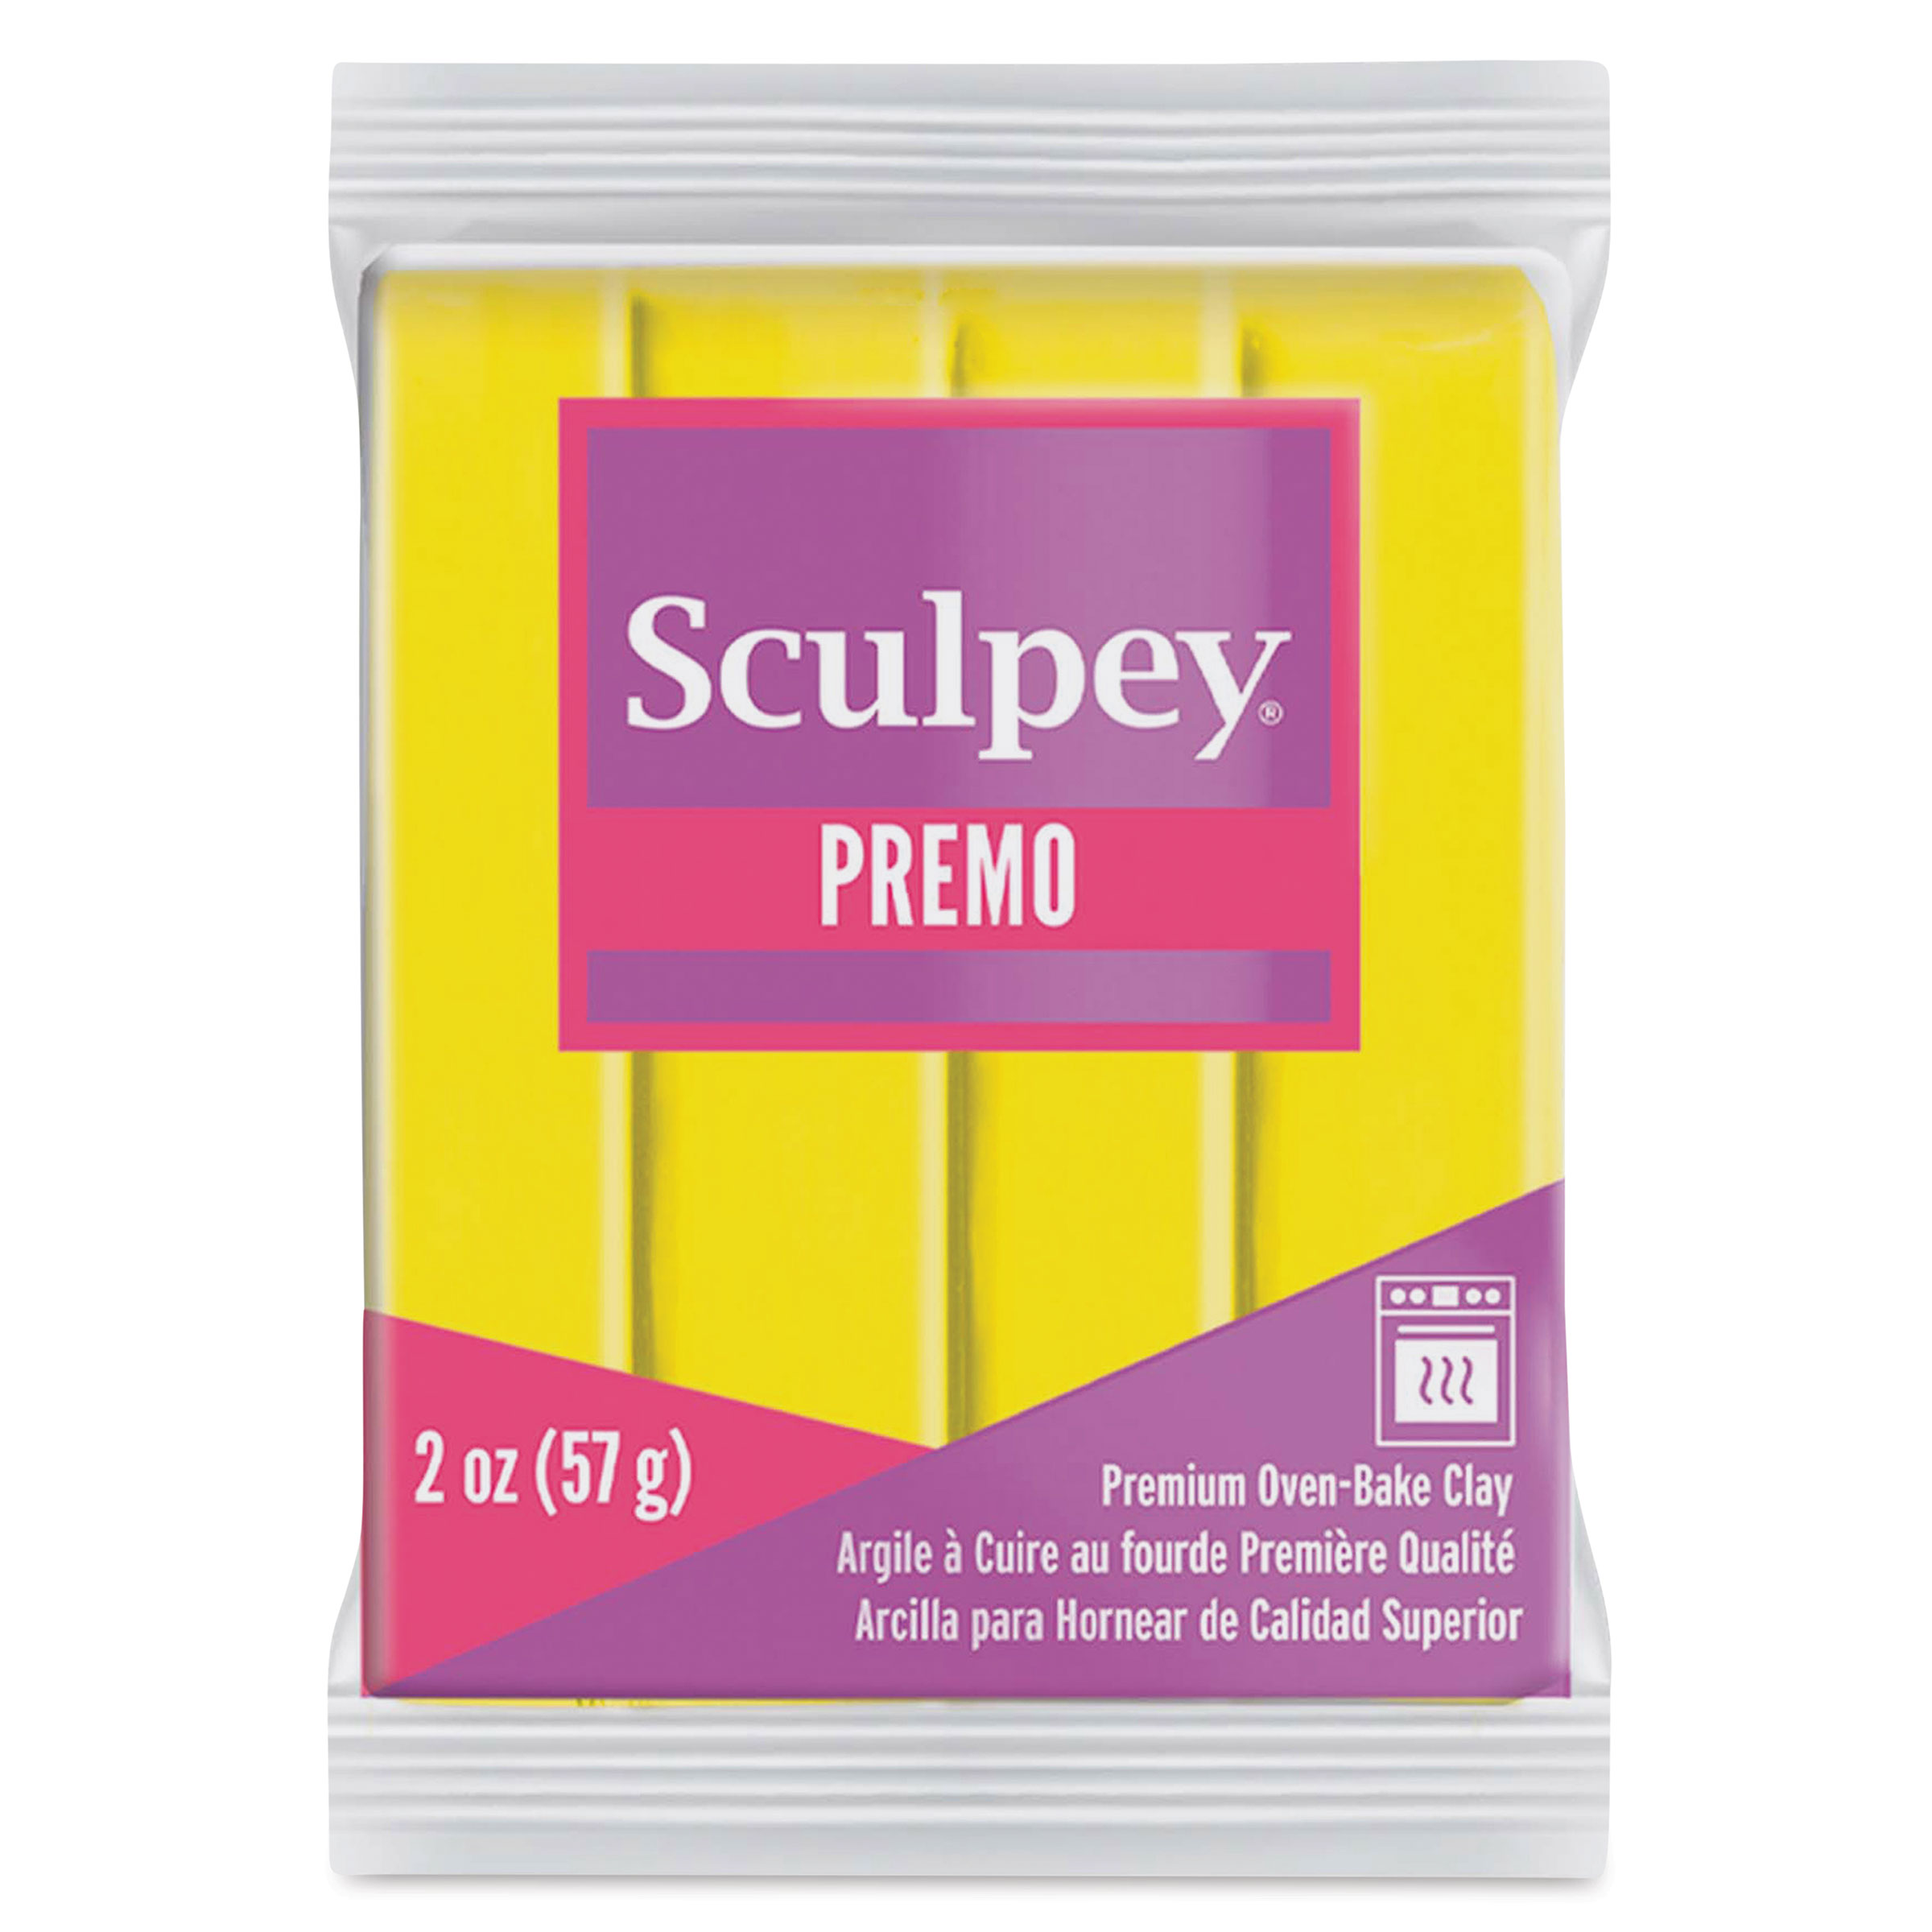 Sculpey PREMO Polymer Clay - Large 1LB Block - Modeling Oven Bake